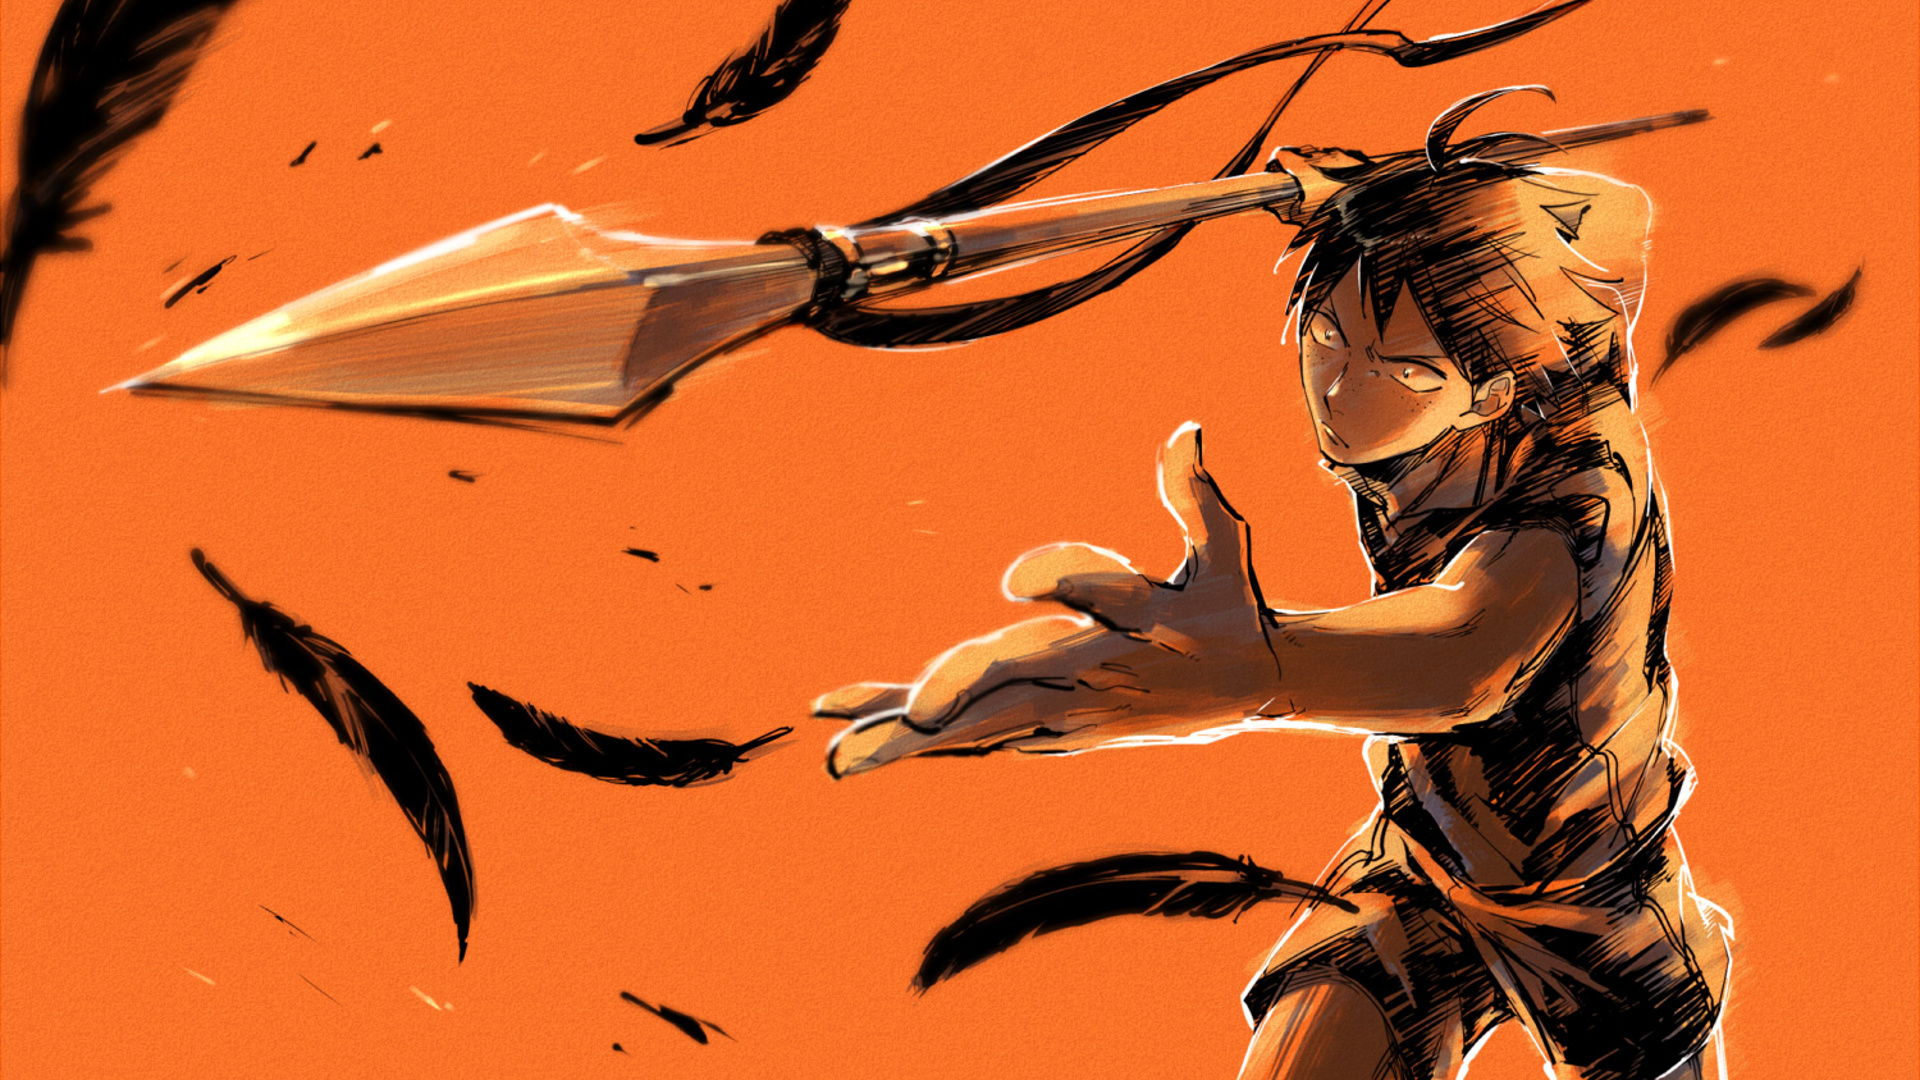 Haikyuu!!: One of the captains who had to act as the team's coach. 1920x1080 Full HD Wallpaper.